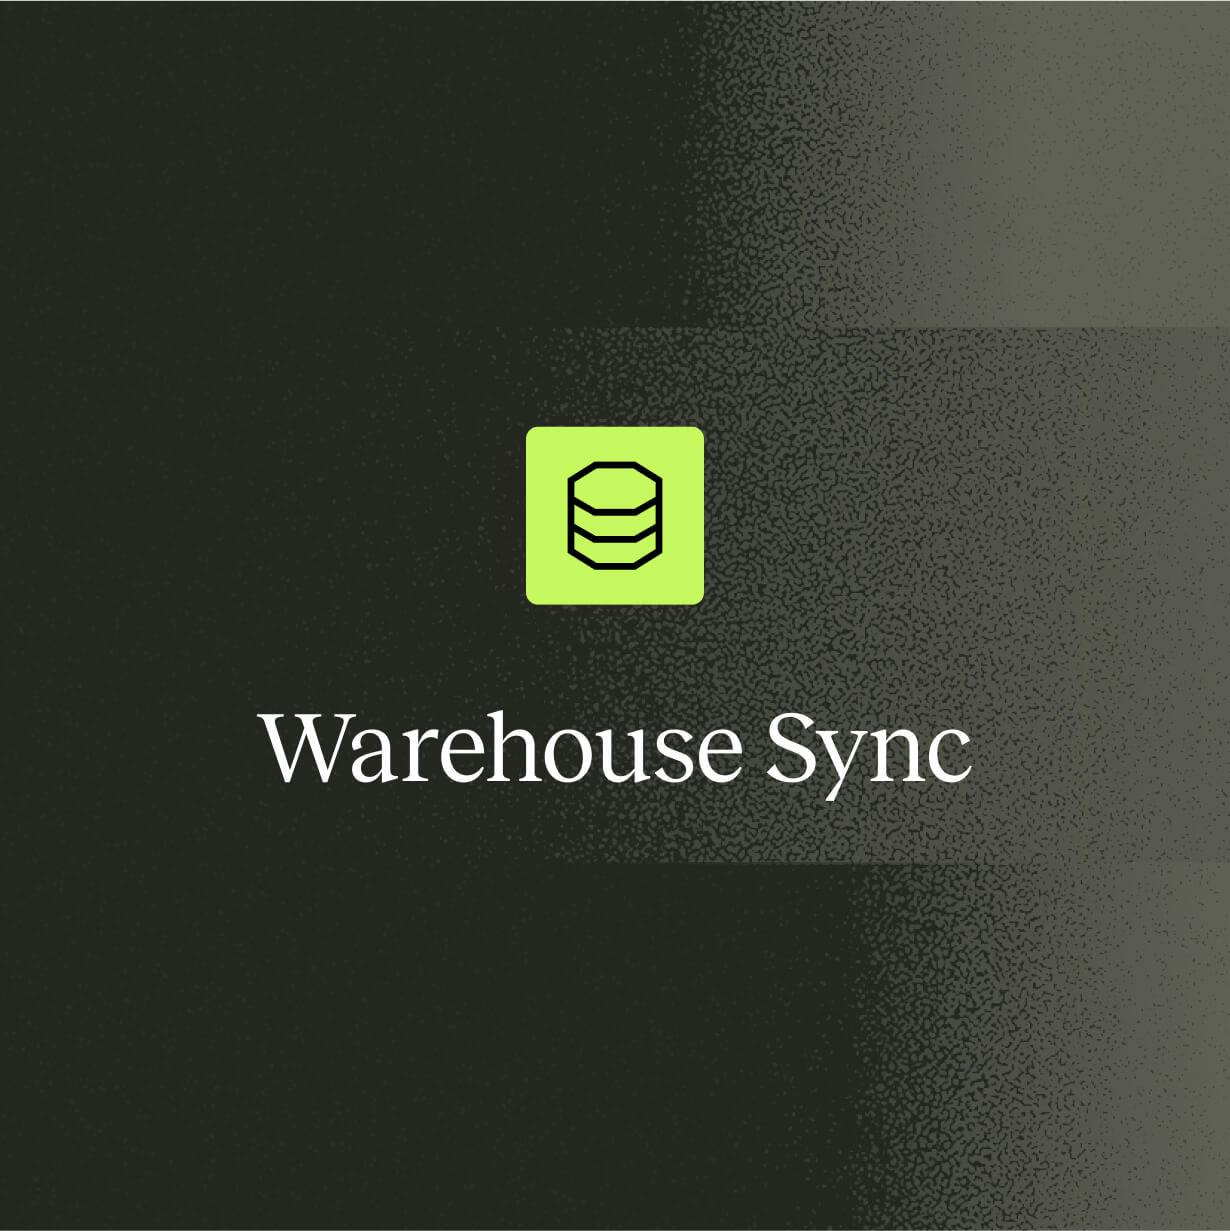 mParticle launches Warehouse Sync to accelerate time to data value